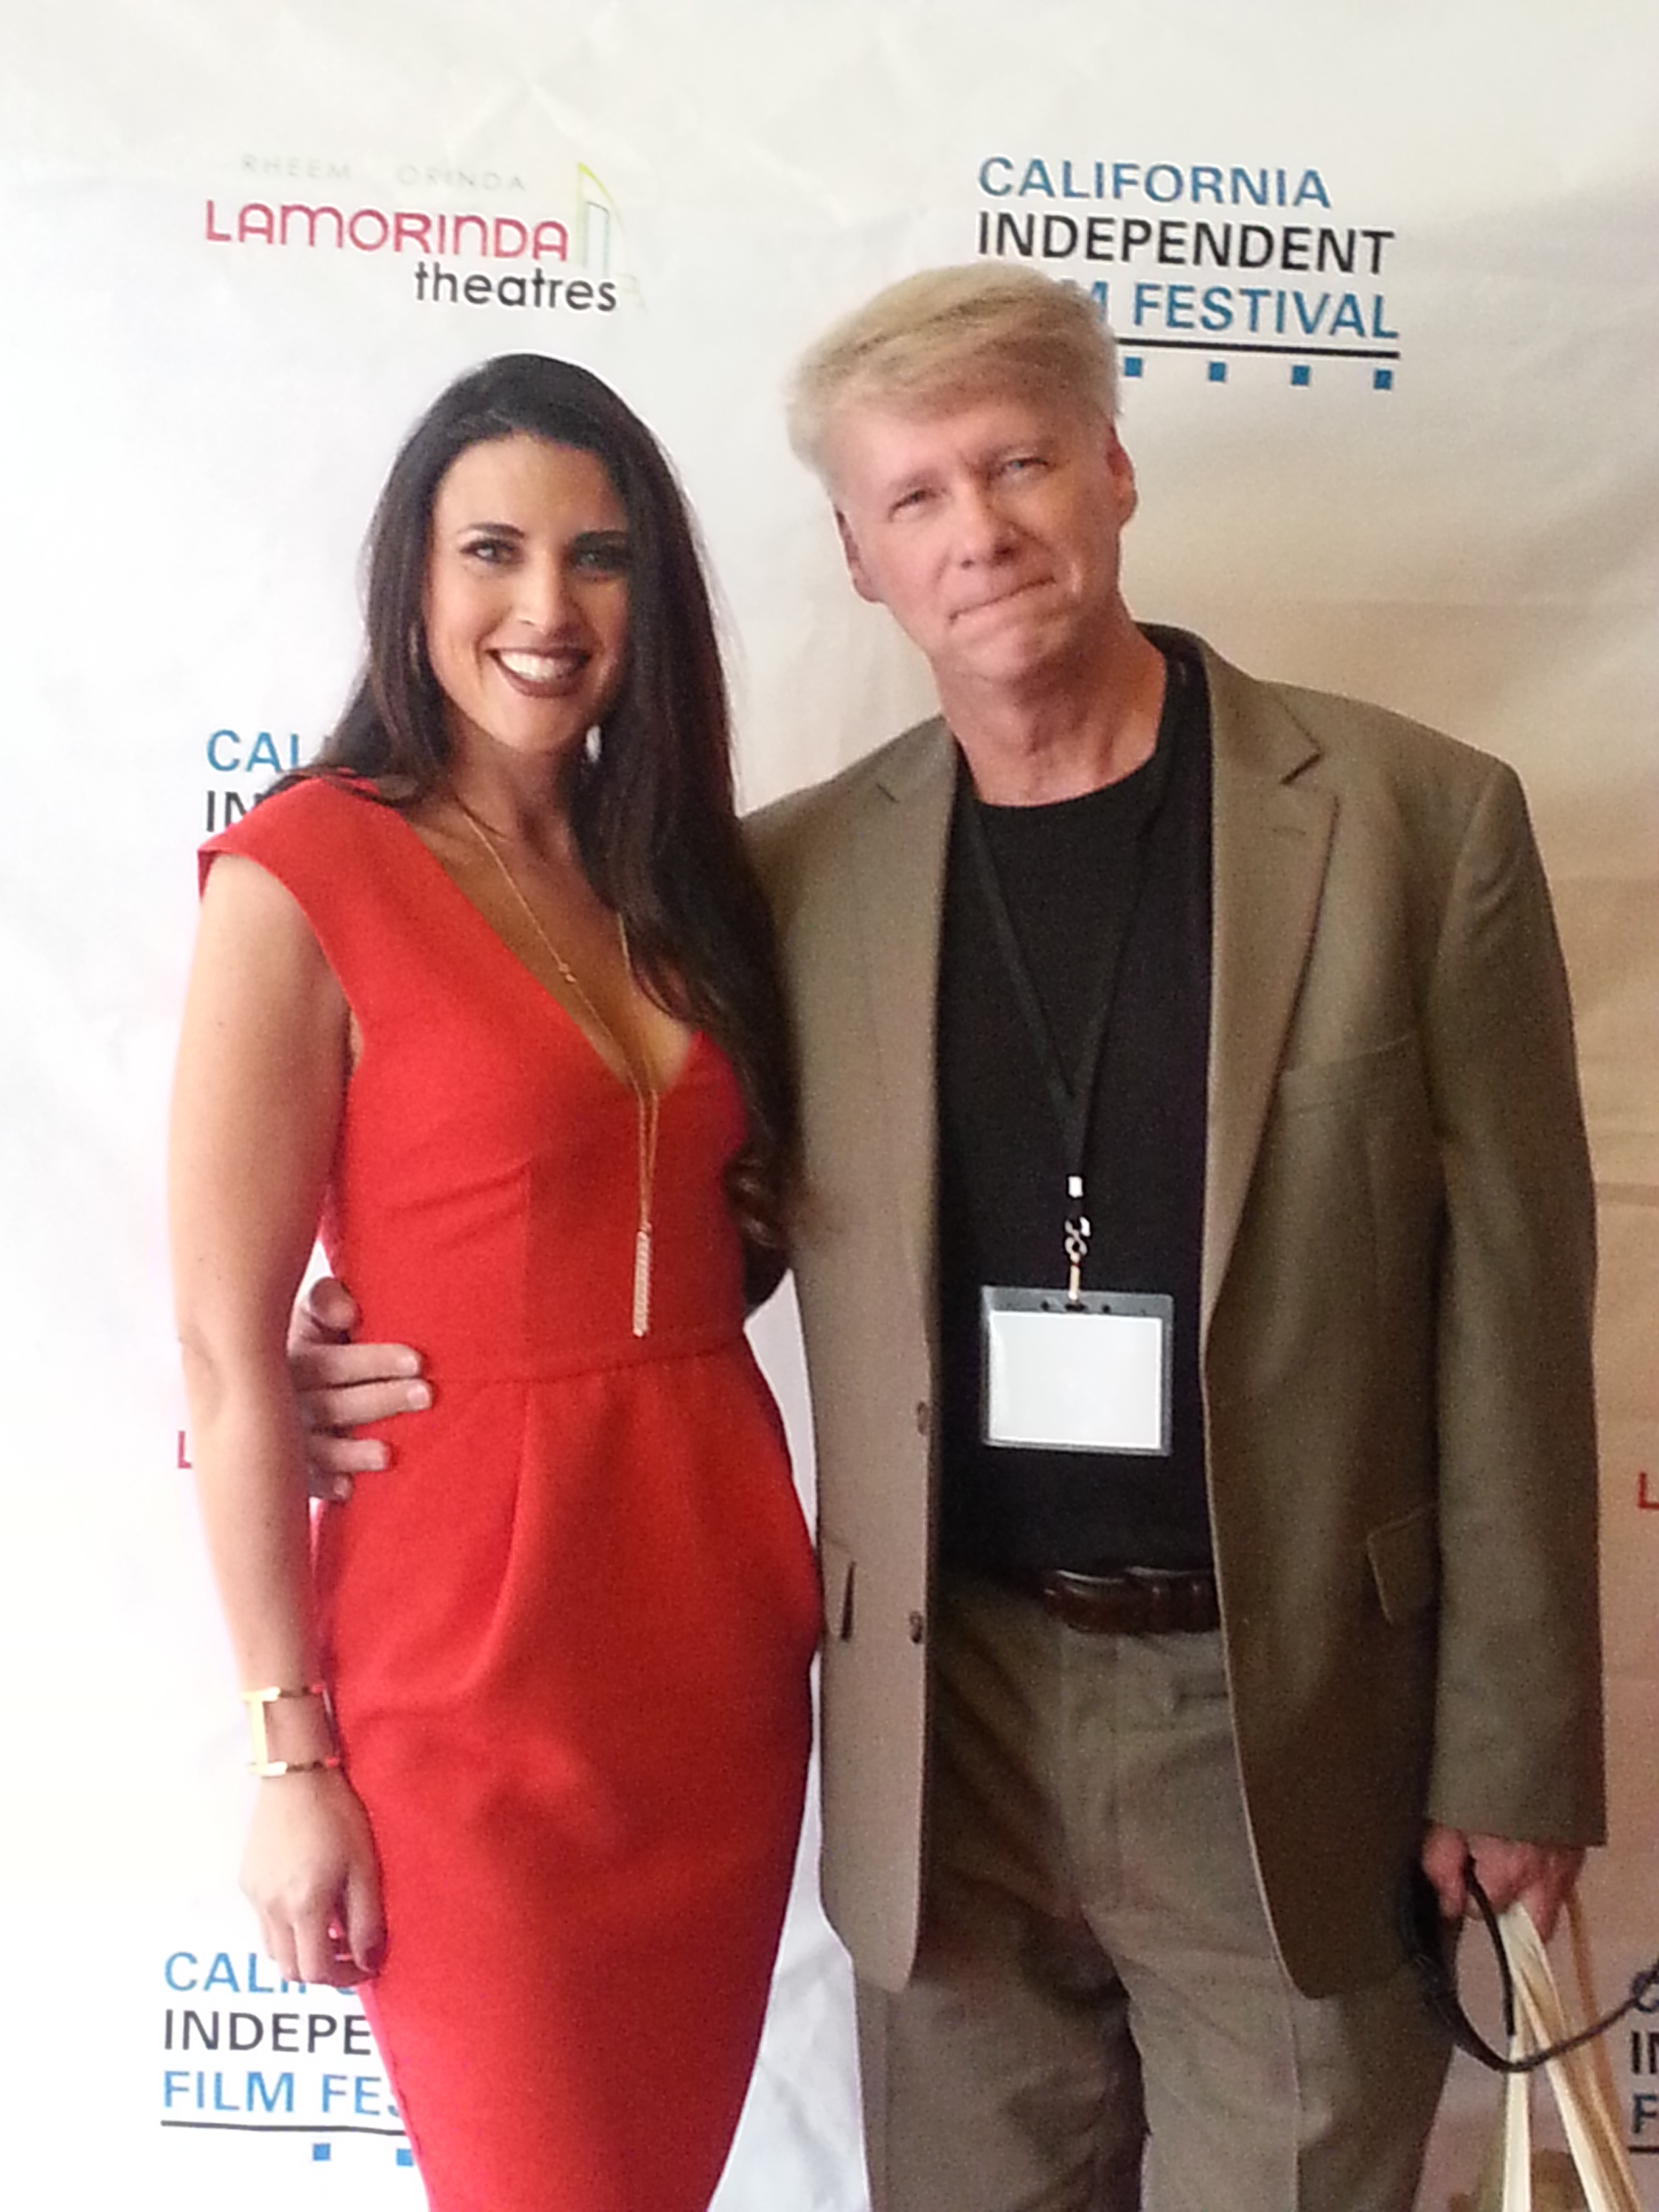 Gretta Sosine with Writer, Director, Producer, Adam Reeves at the California Independent Film Festival screening for My Brother's Shoes